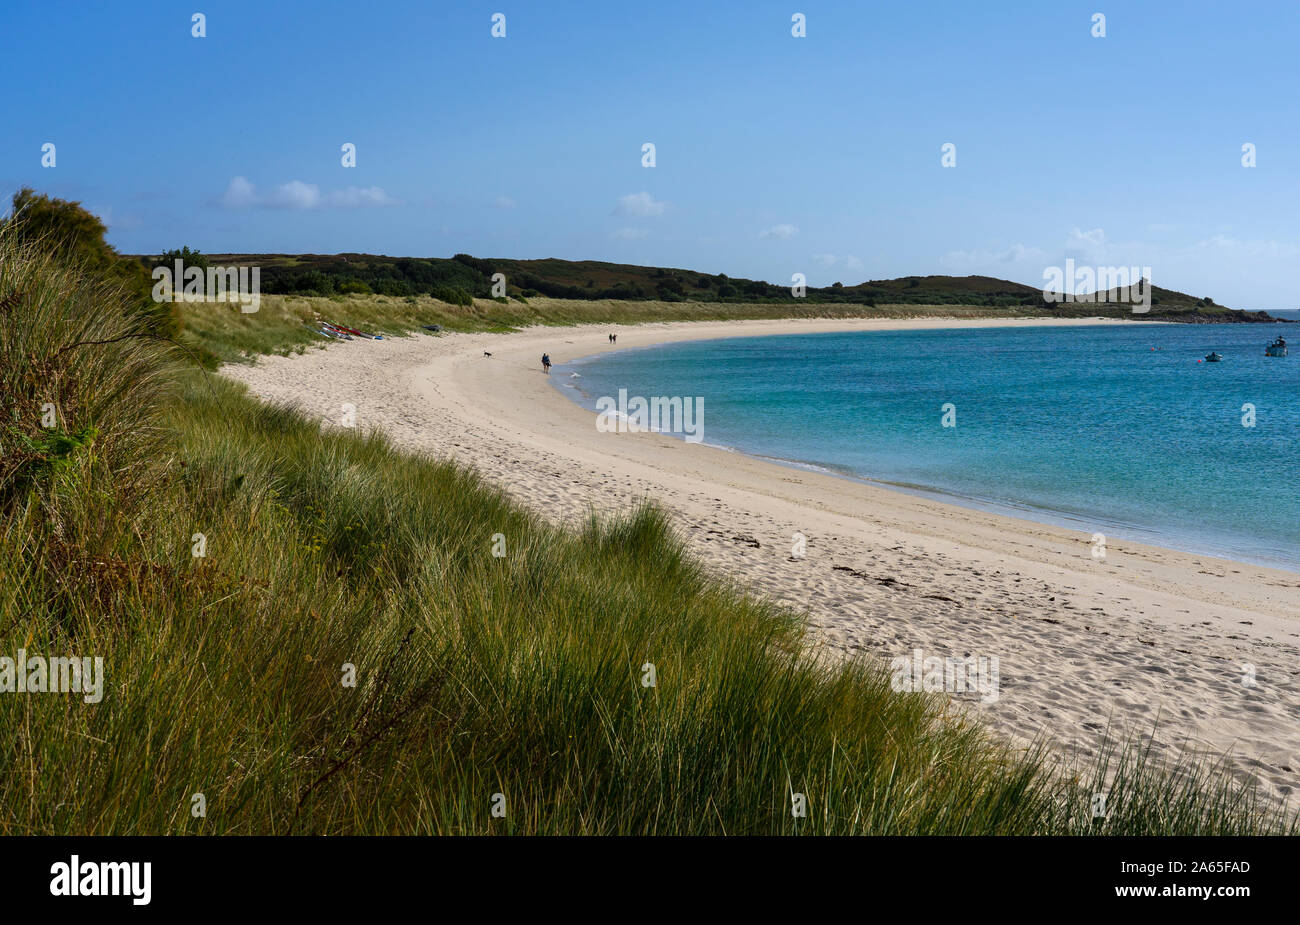 St Martin's,Isole Scilly, Inghilterra, Europa Foto Stock